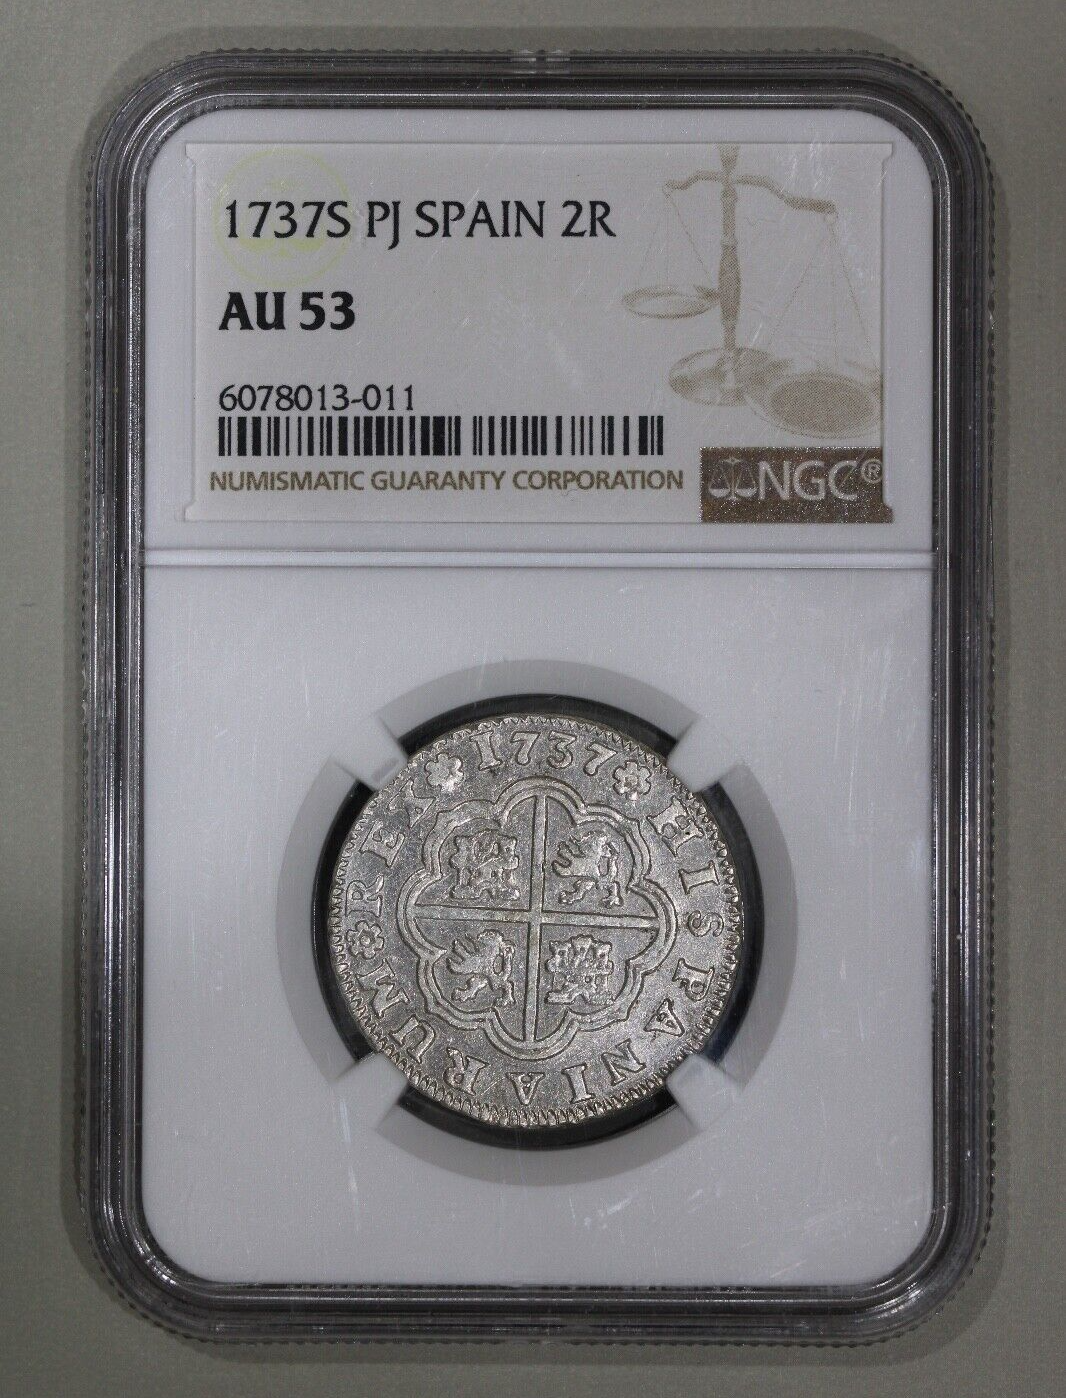 1737 PJ Seville Spain 2 Reales NGC AU53 Silver Coin